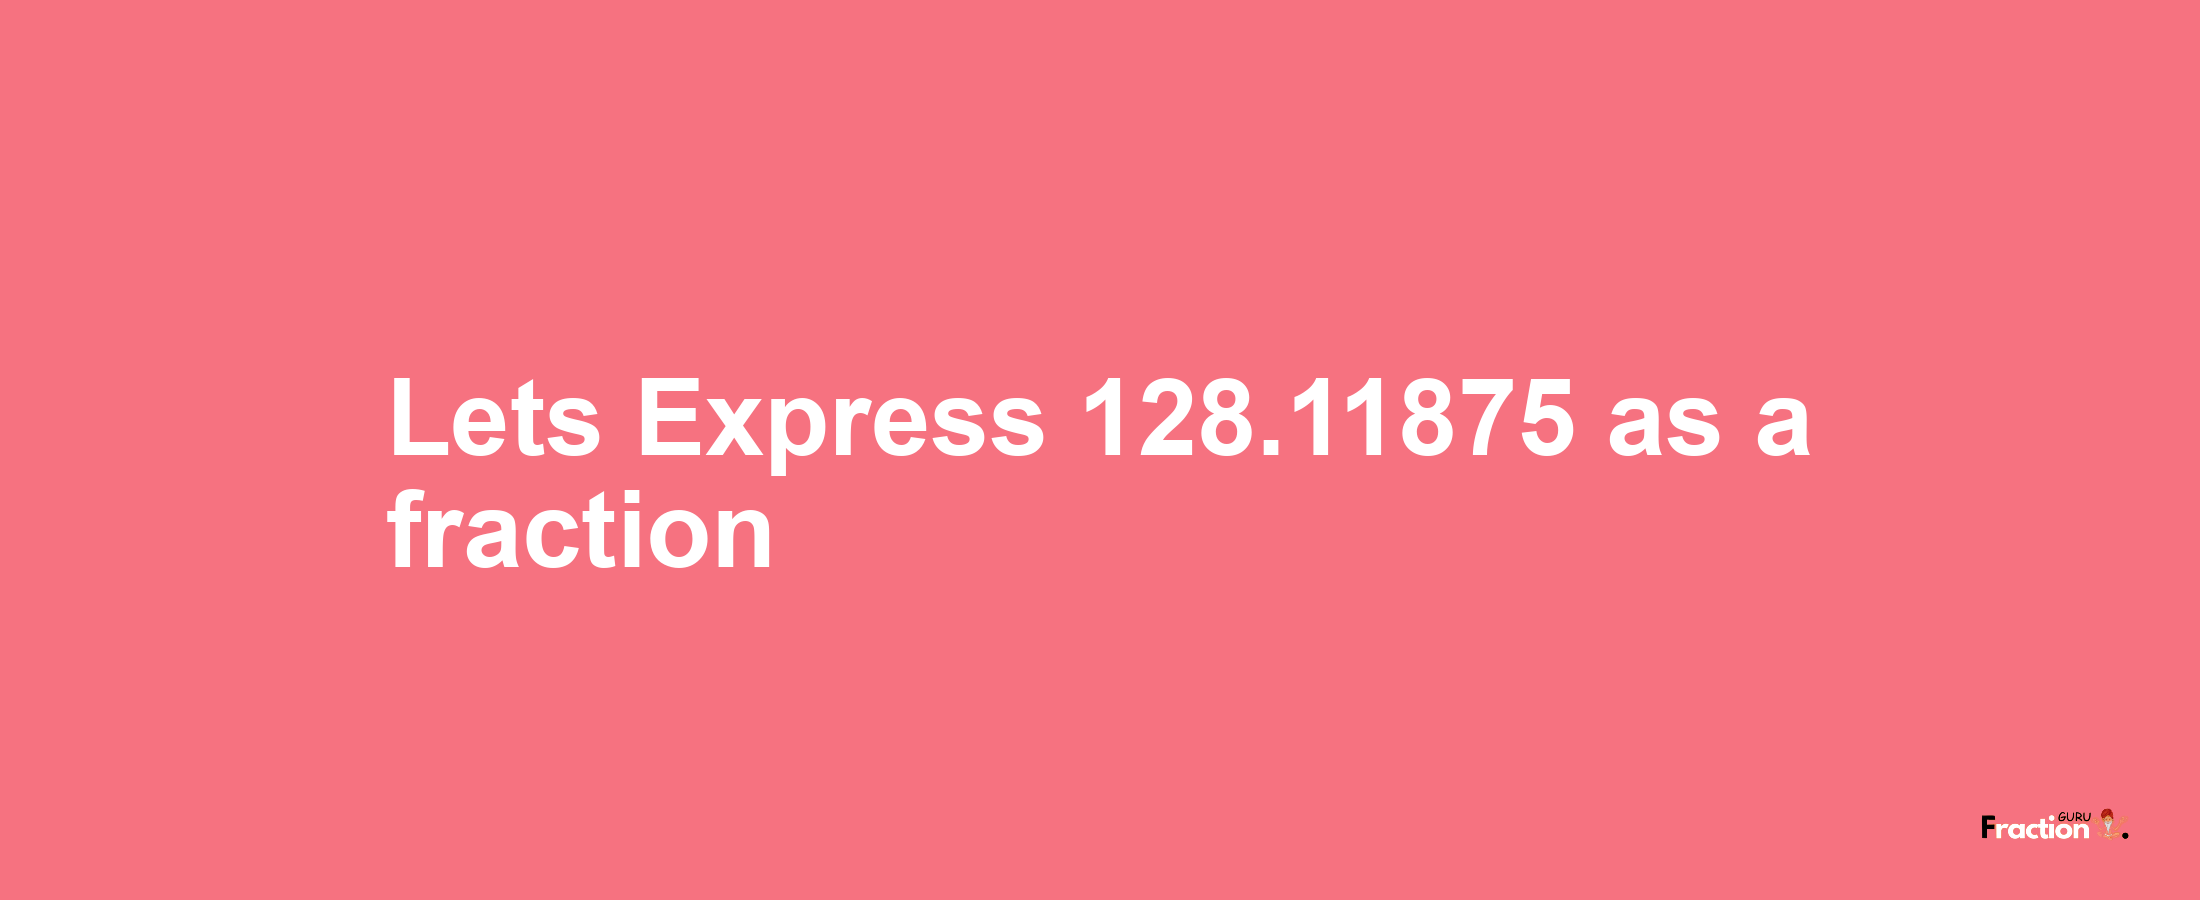 Lets Express 128.11875 as afraction